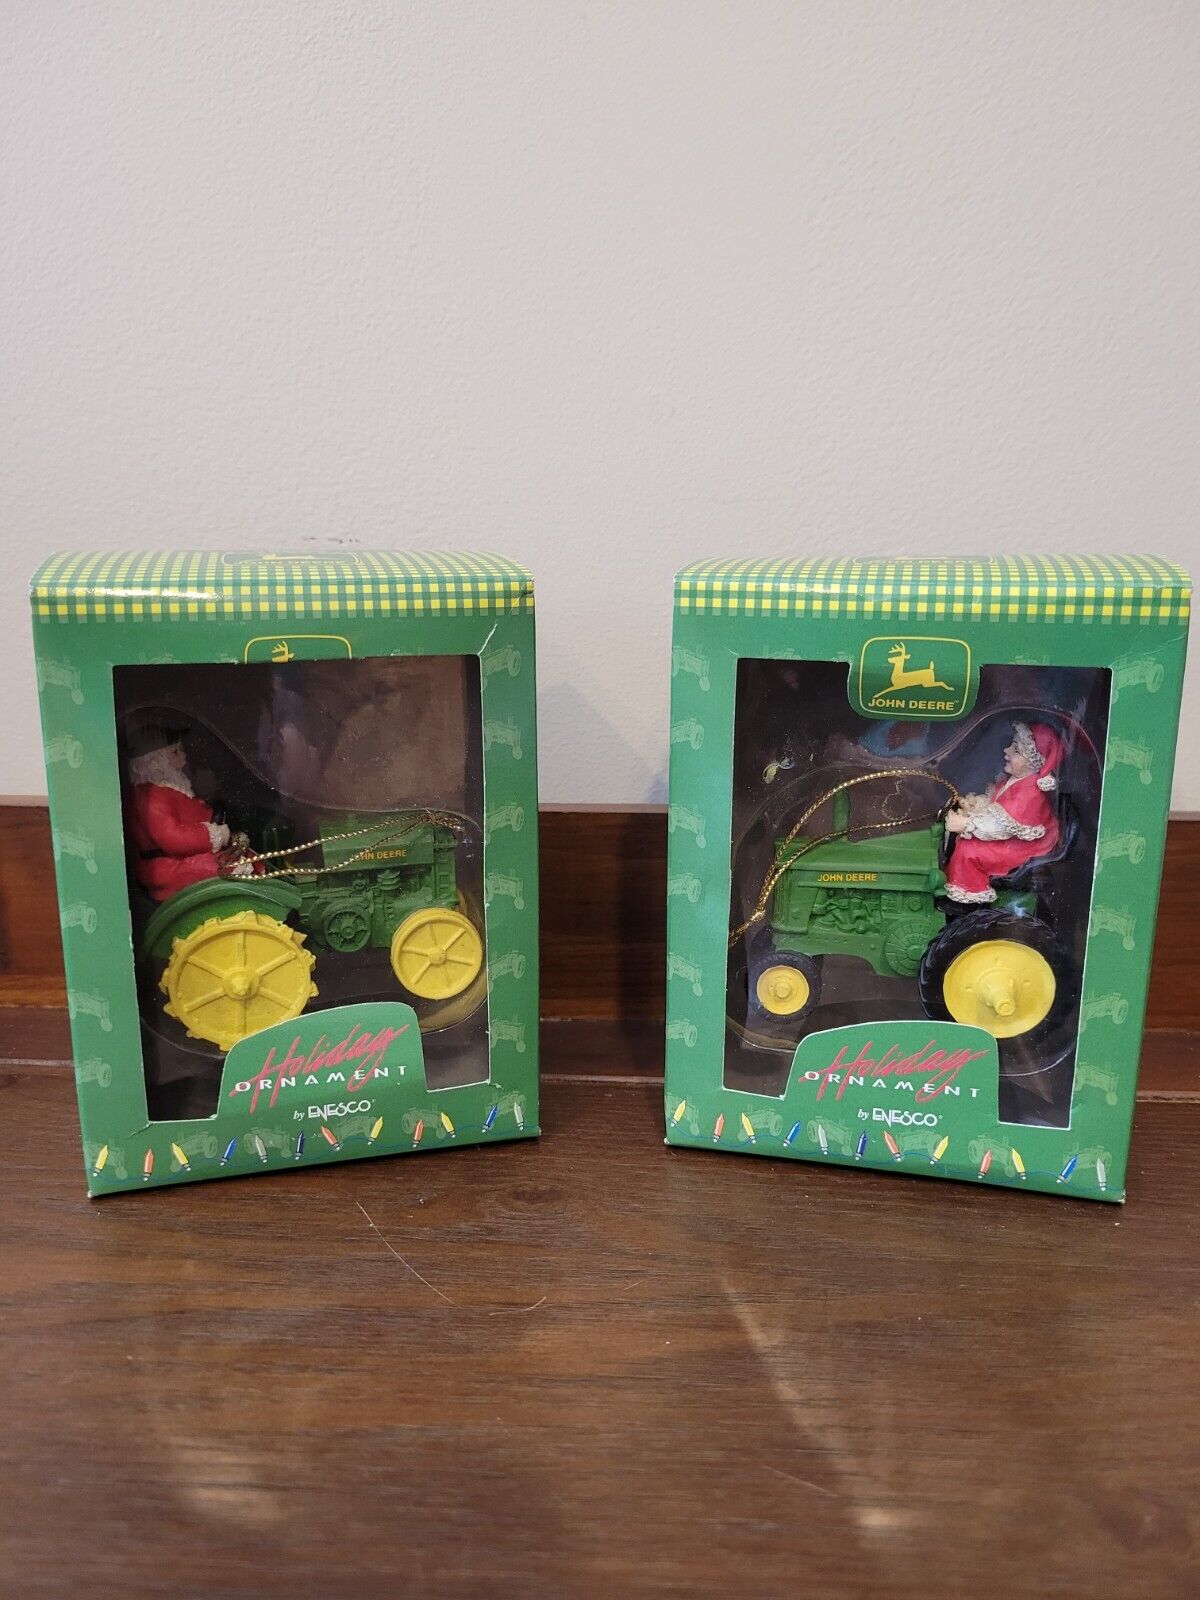 John Deere, by Enesco, Holiday Ornaments.   Santa and Mrs. Claus on a tractor.